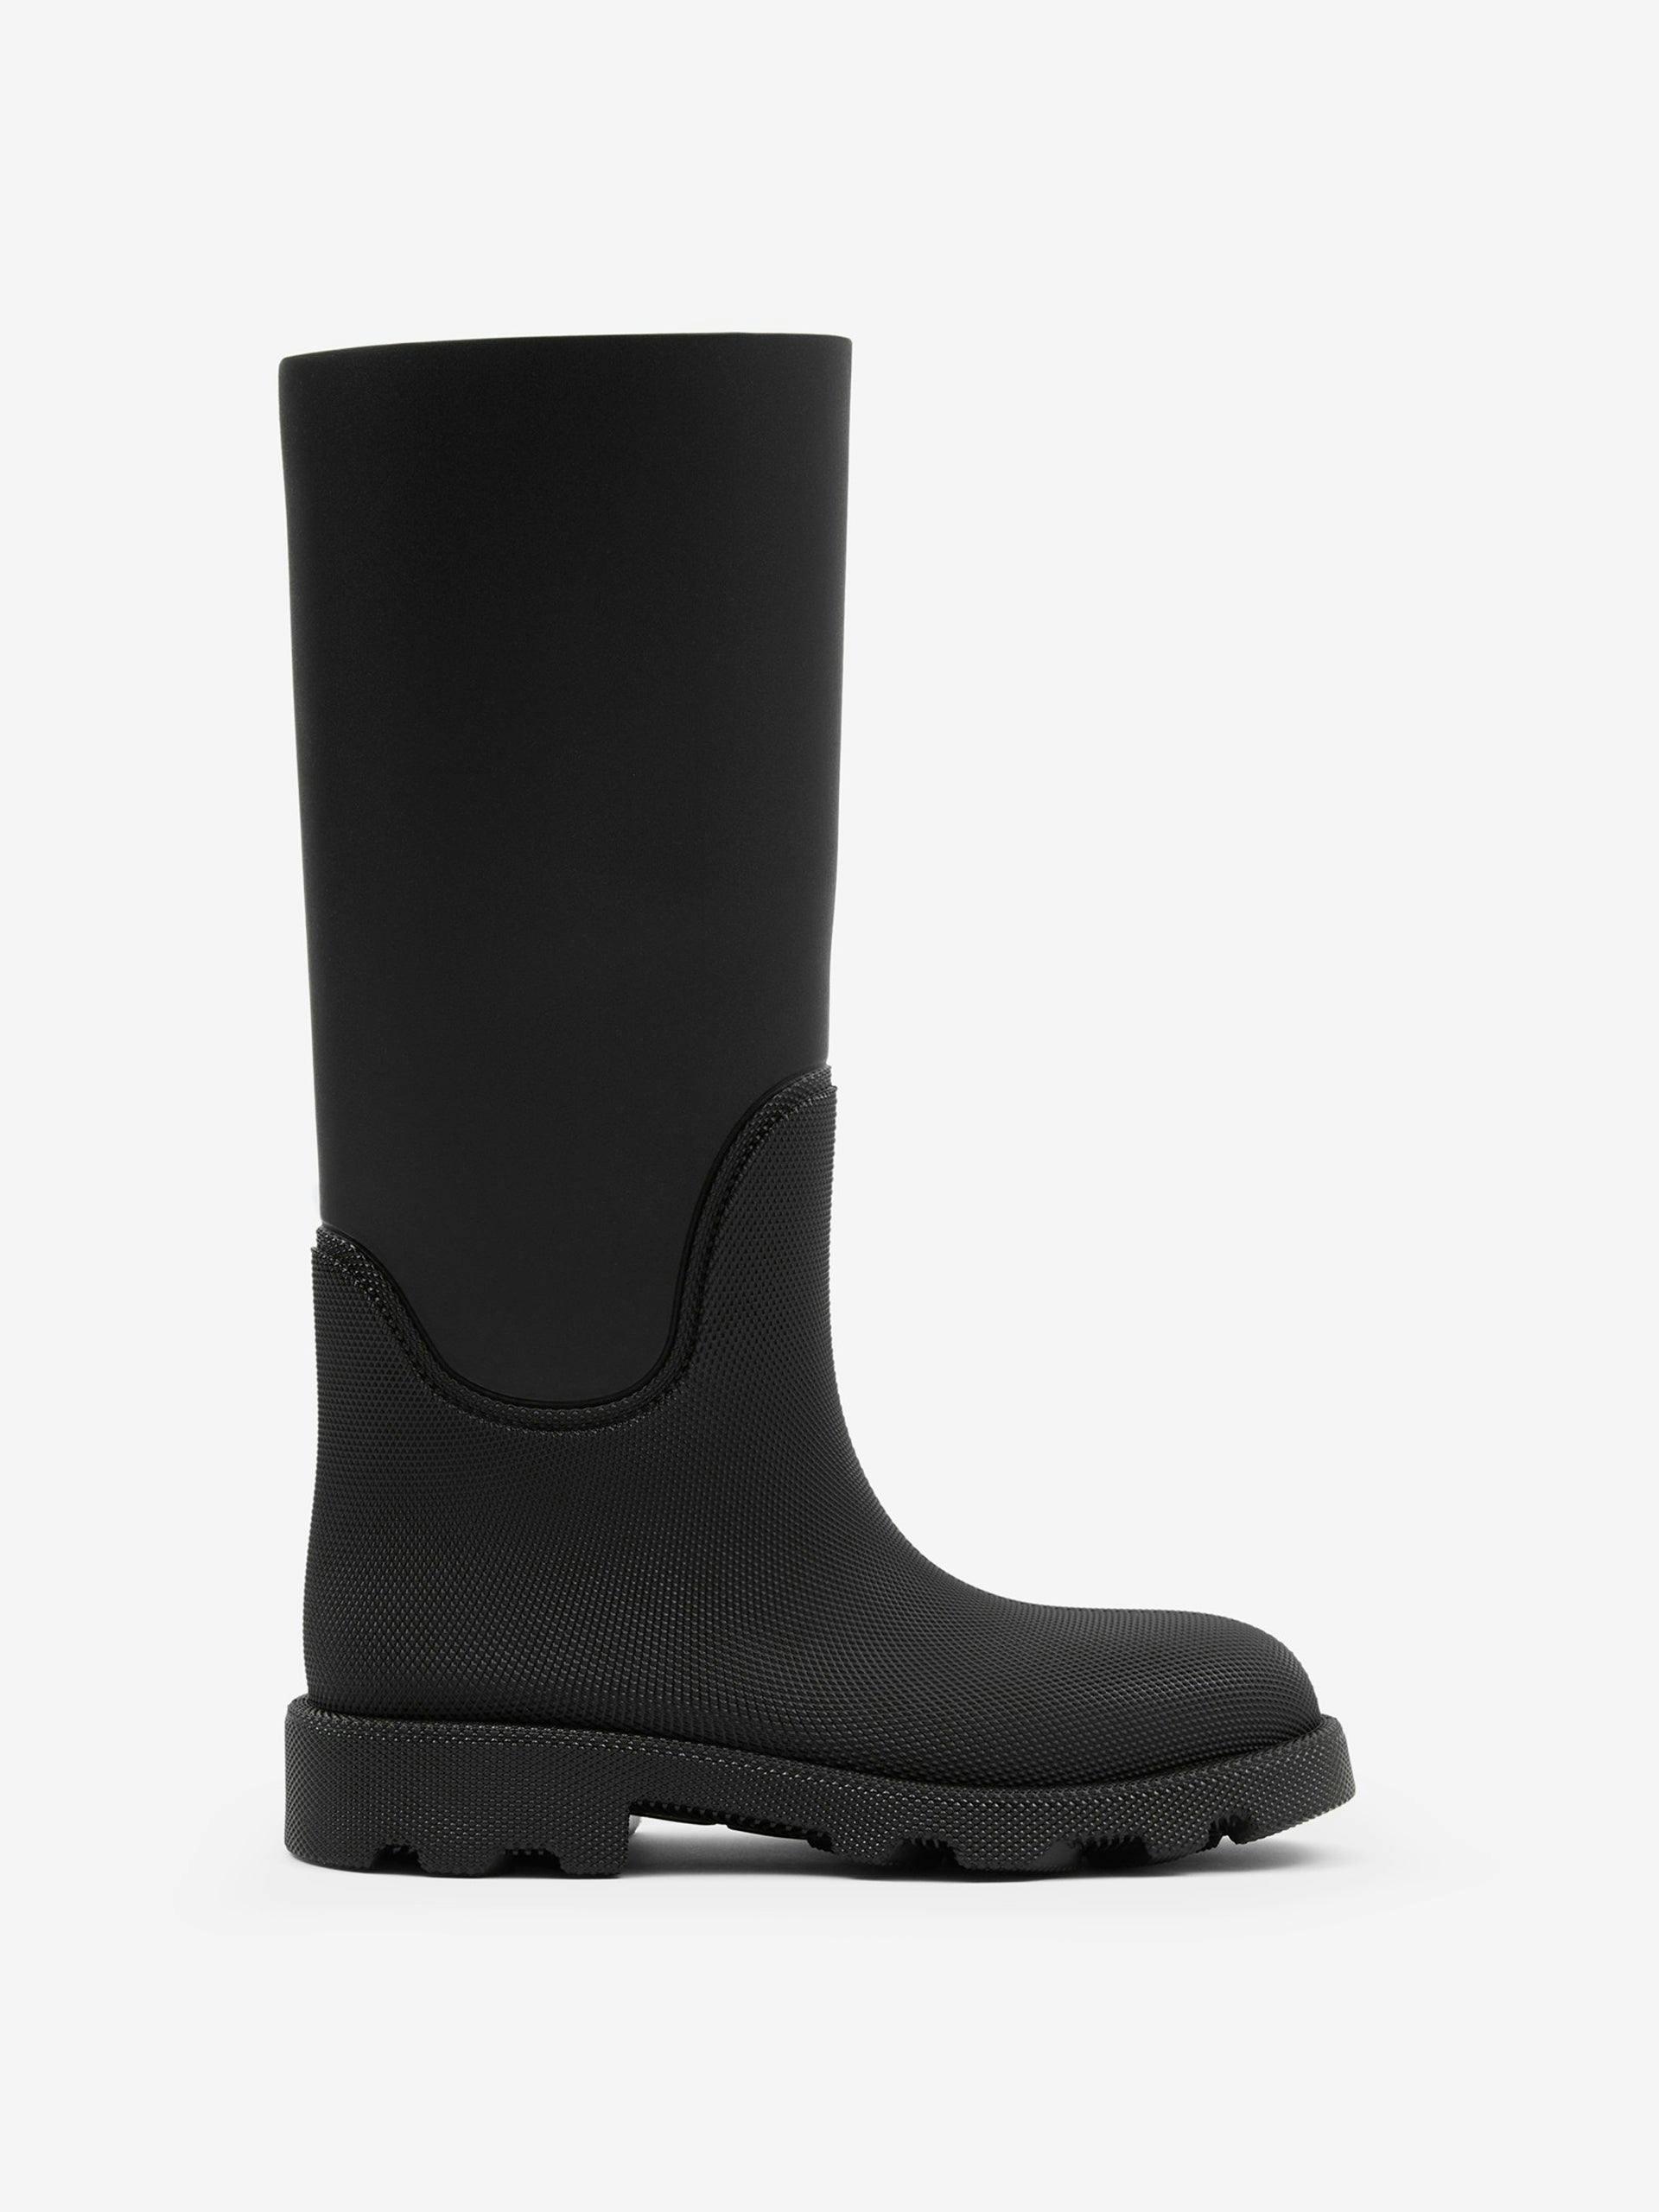 Black rubber high boots